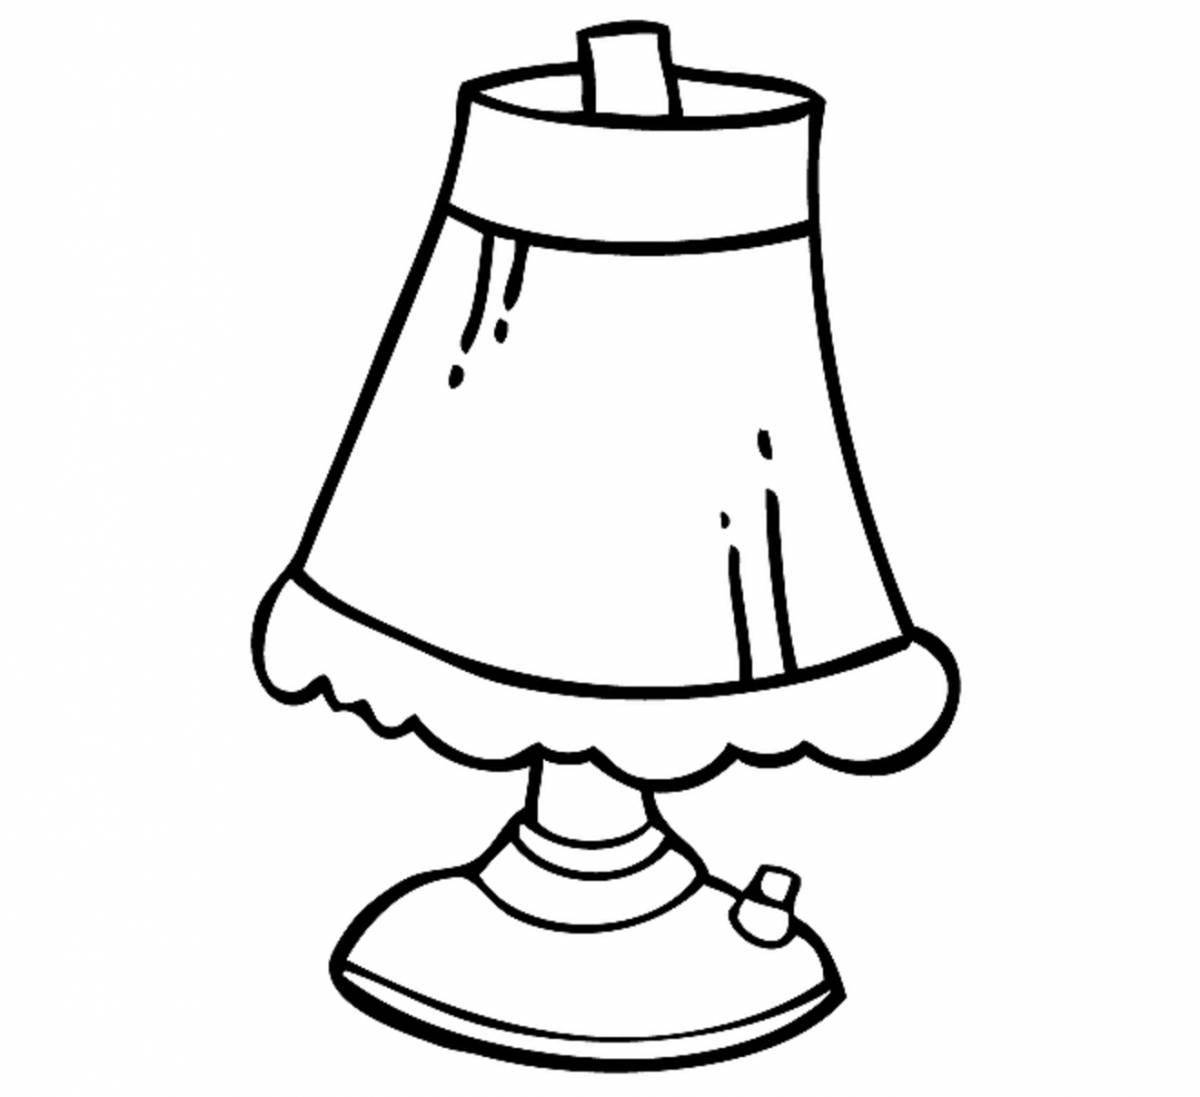 Glowing lamp coloring book for children